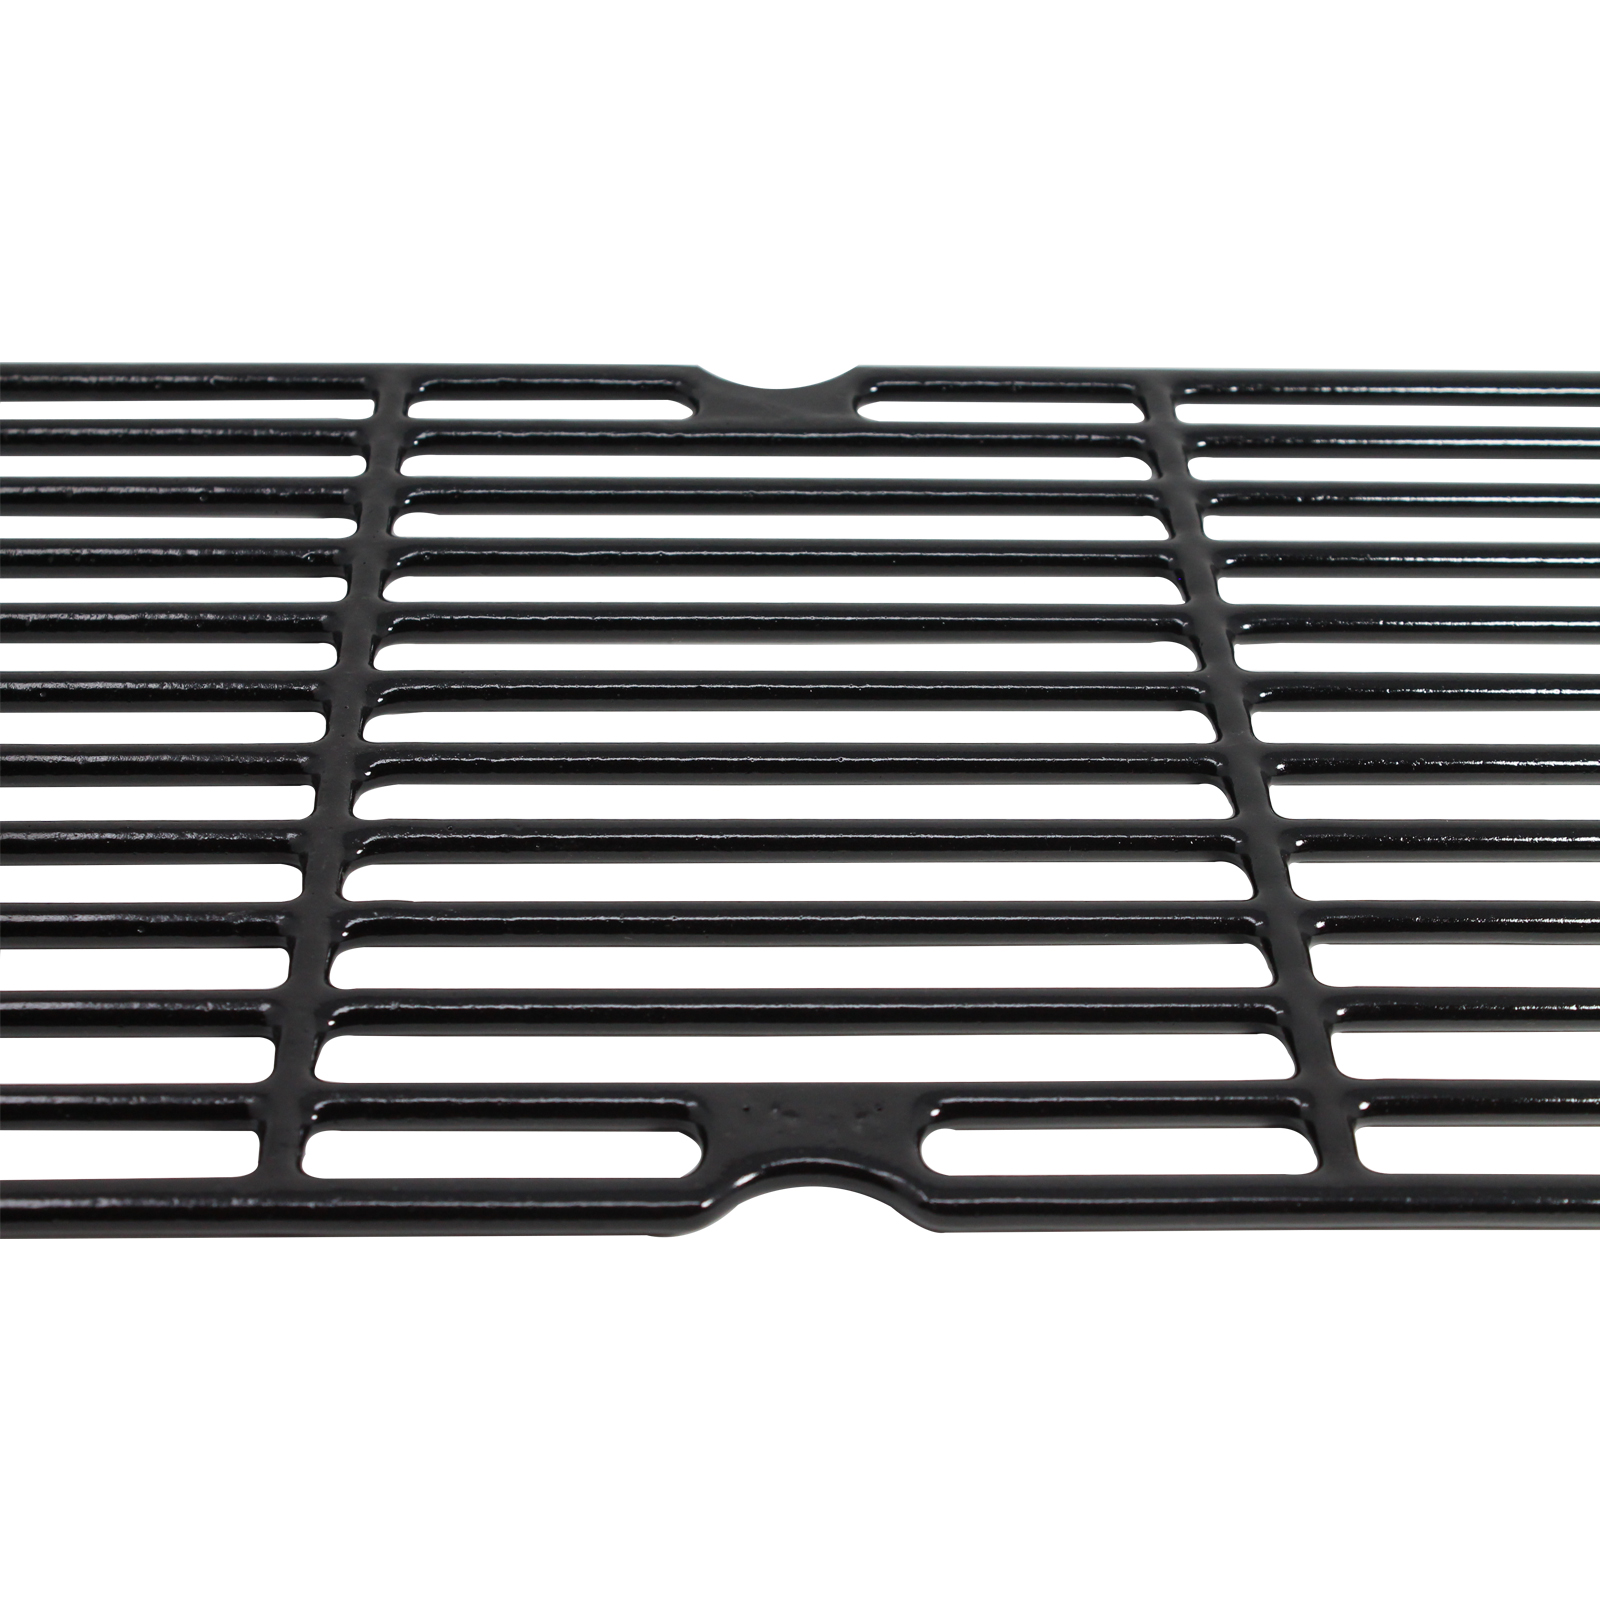 2 Pack BBQ Grill Cooking Grates Replacement for Broil King Sovereign 90, Broil King Sovereign 20, Broil King Sovereign 70, Charbroil 463251605, Charbroil 463251713, 463240904 - Cast Iron Grid 16 3/4" - image 3 of 4